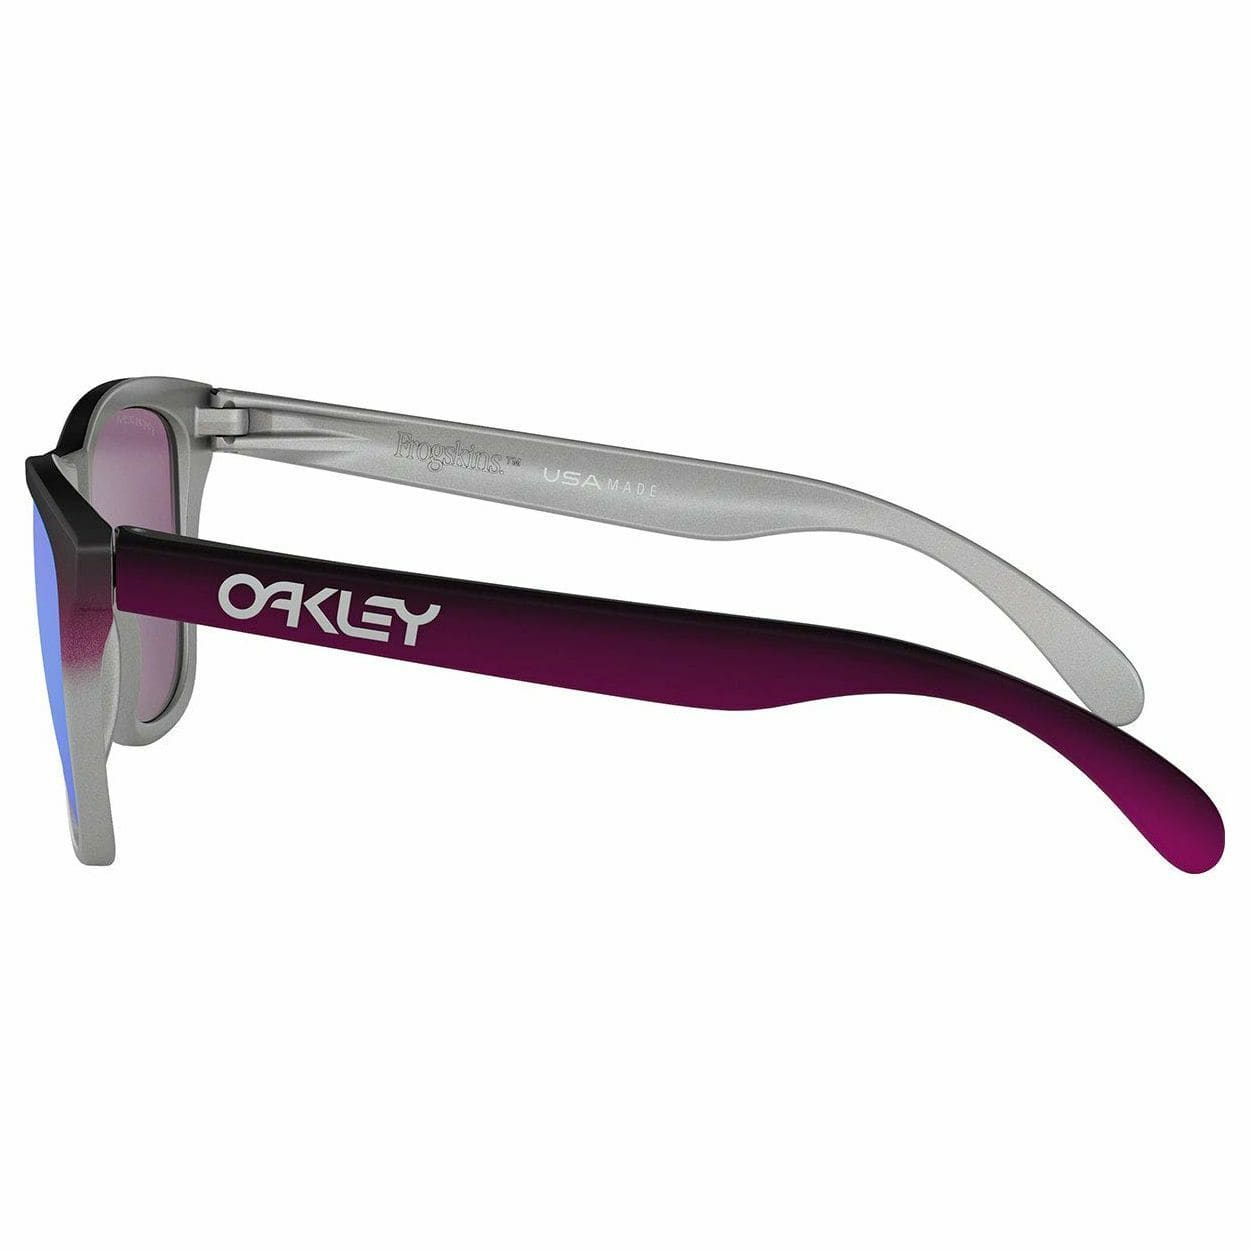 Oakley OO9245-8154 Frogskins Black Pink Fade Square Prizm Sapphire Lens Sunglasses 888392395139